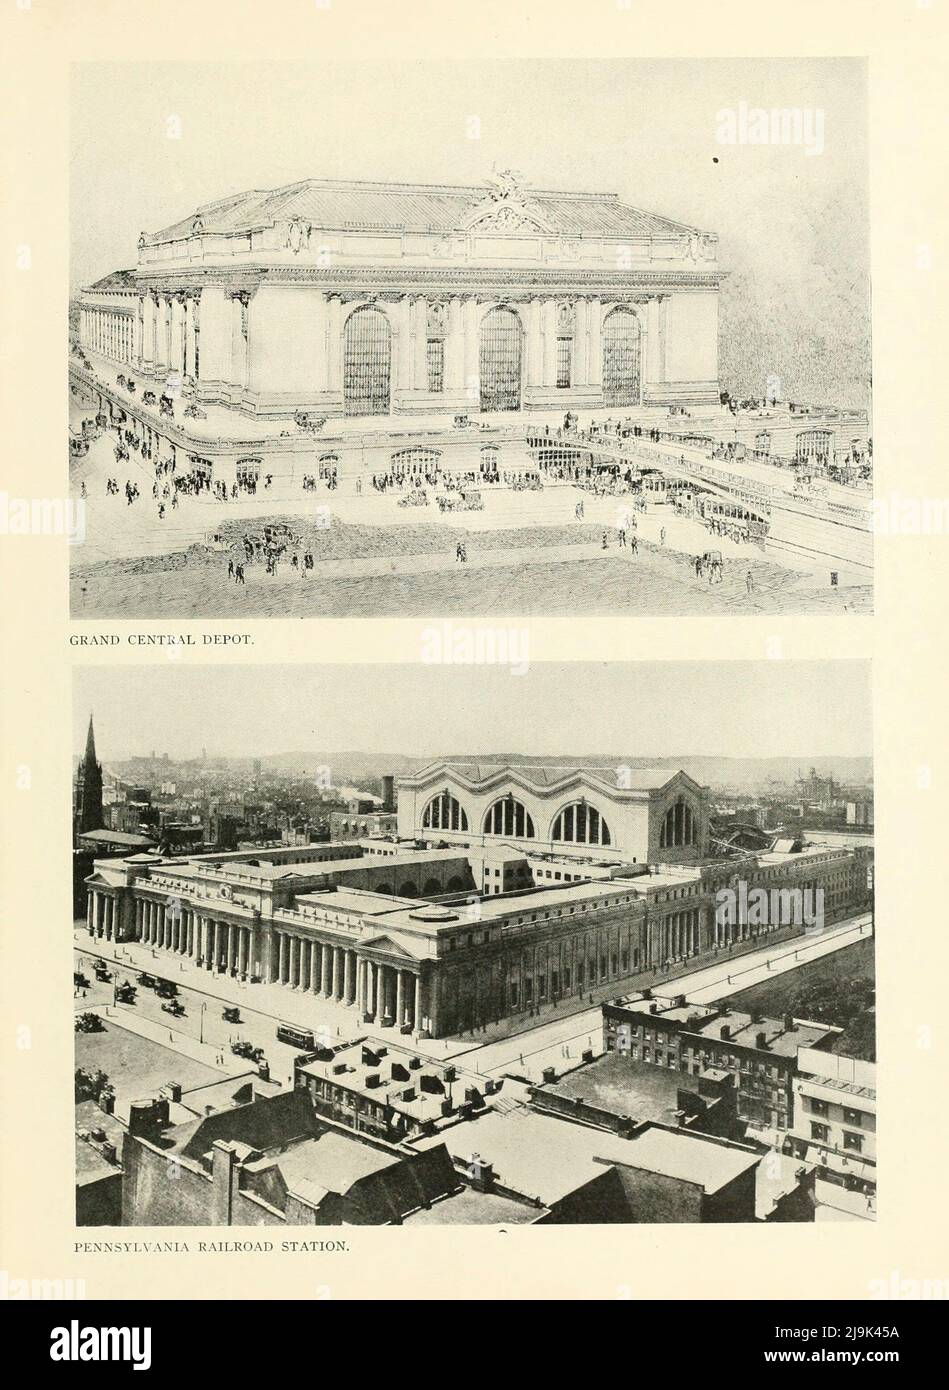 Grand Central Depot; Pennsylvania Railroad Station from the book ' New York illustrated ' Publication date 1911 Publisher New York : Success Postal Card Co. Stock Photo